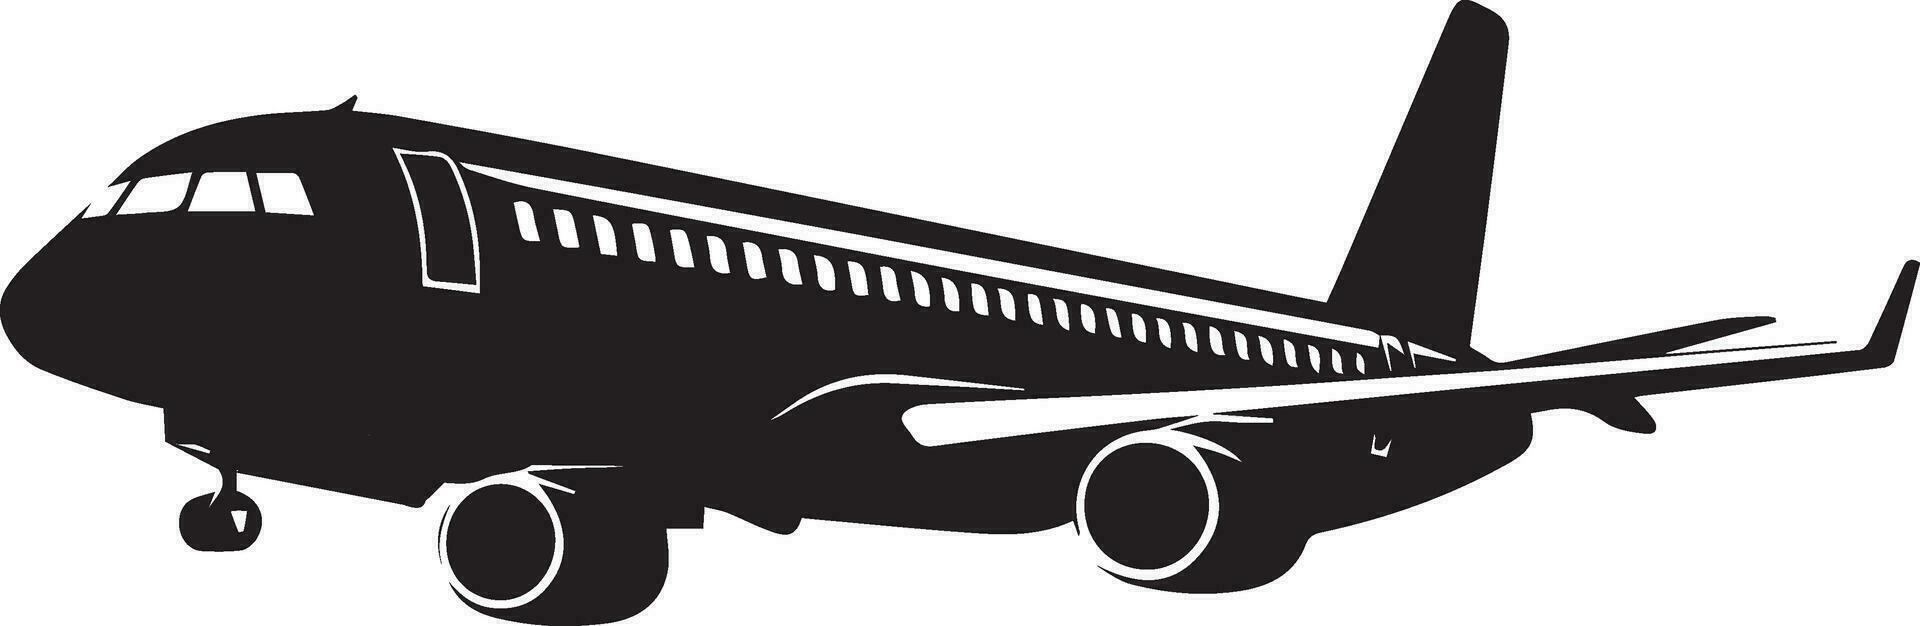 Airplane vector silhouette black color 3